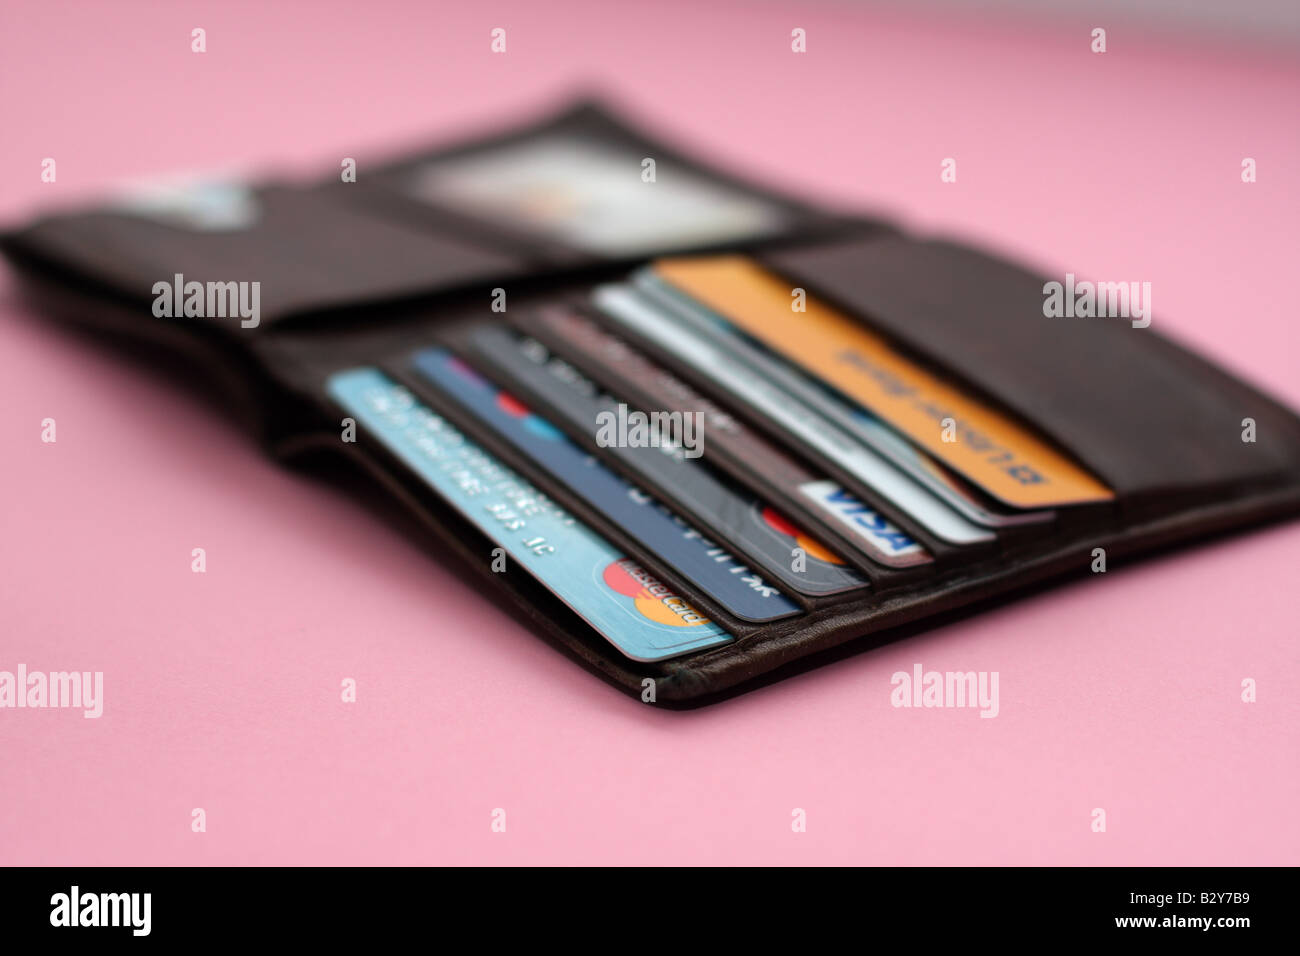 Wallet with credit cards Stock Photo